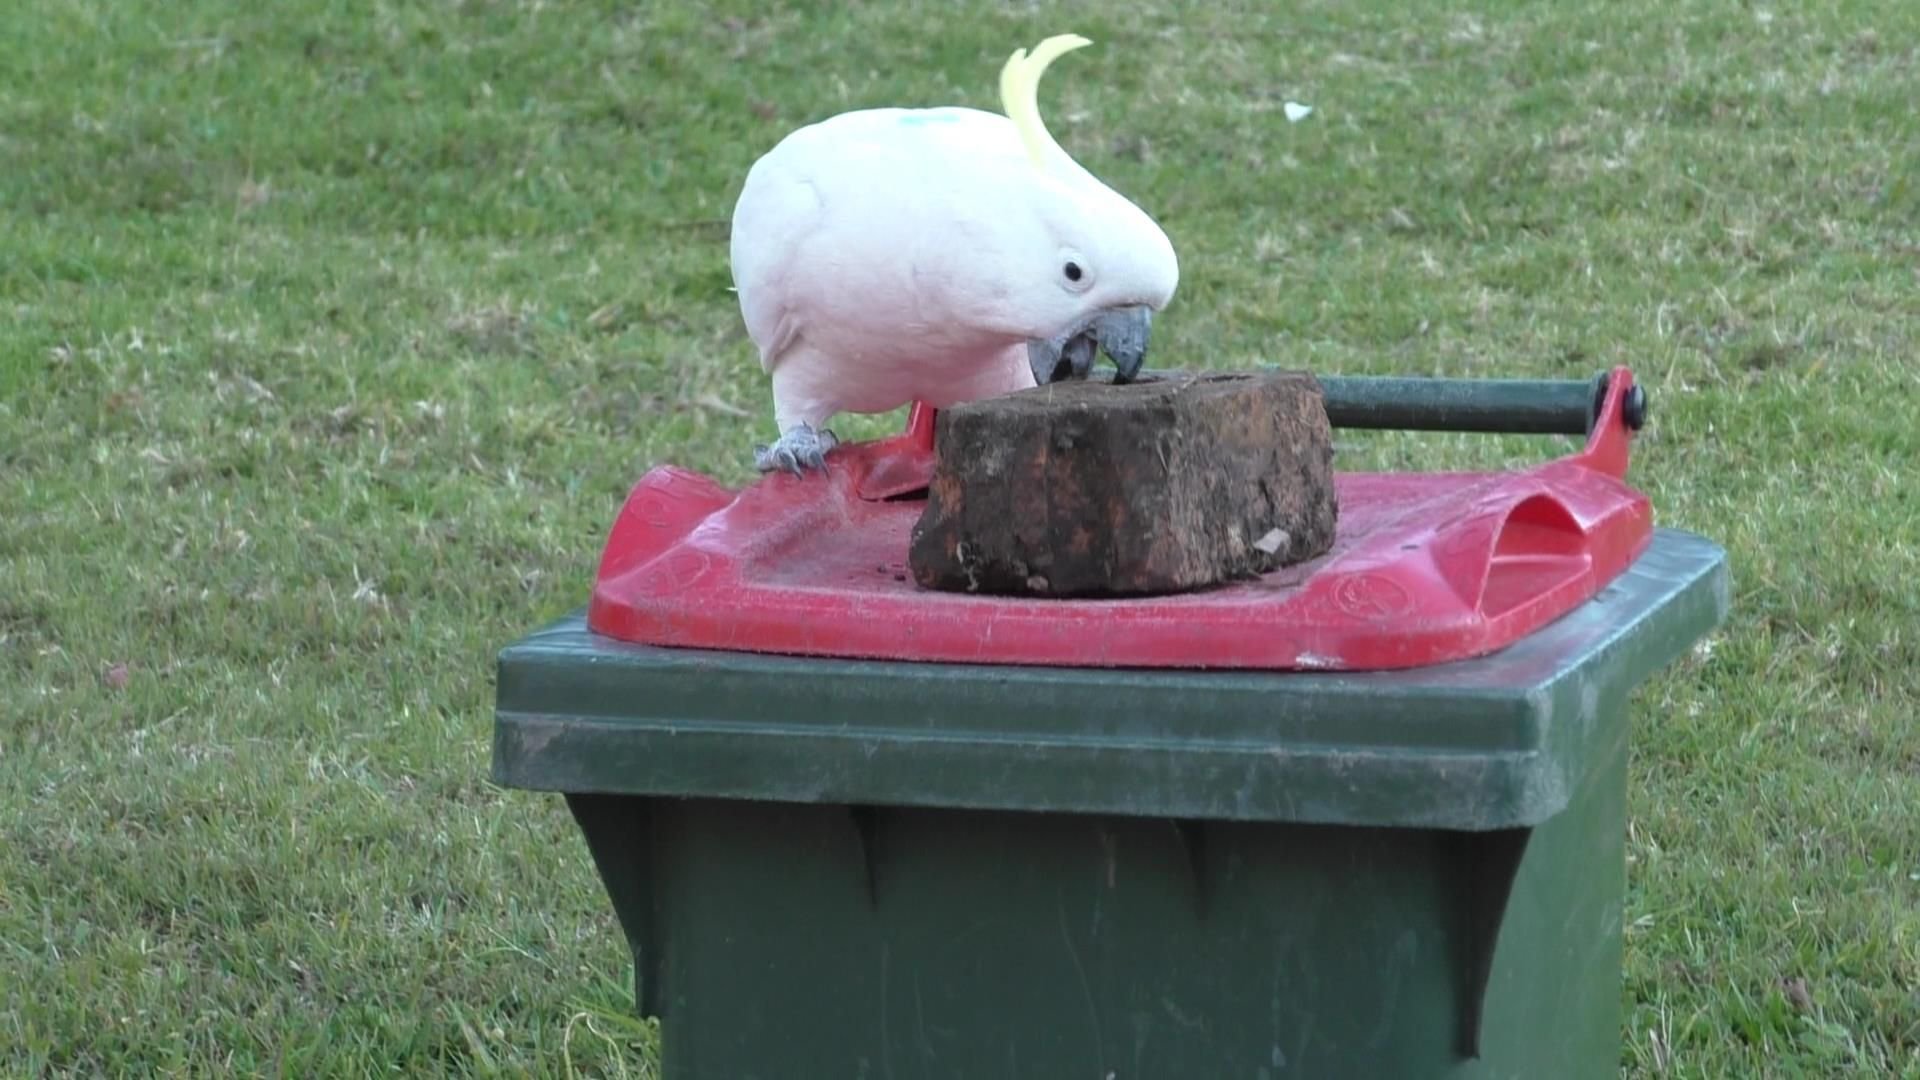 Cockatoos and Humans Battle Over Trash Cans in Australia